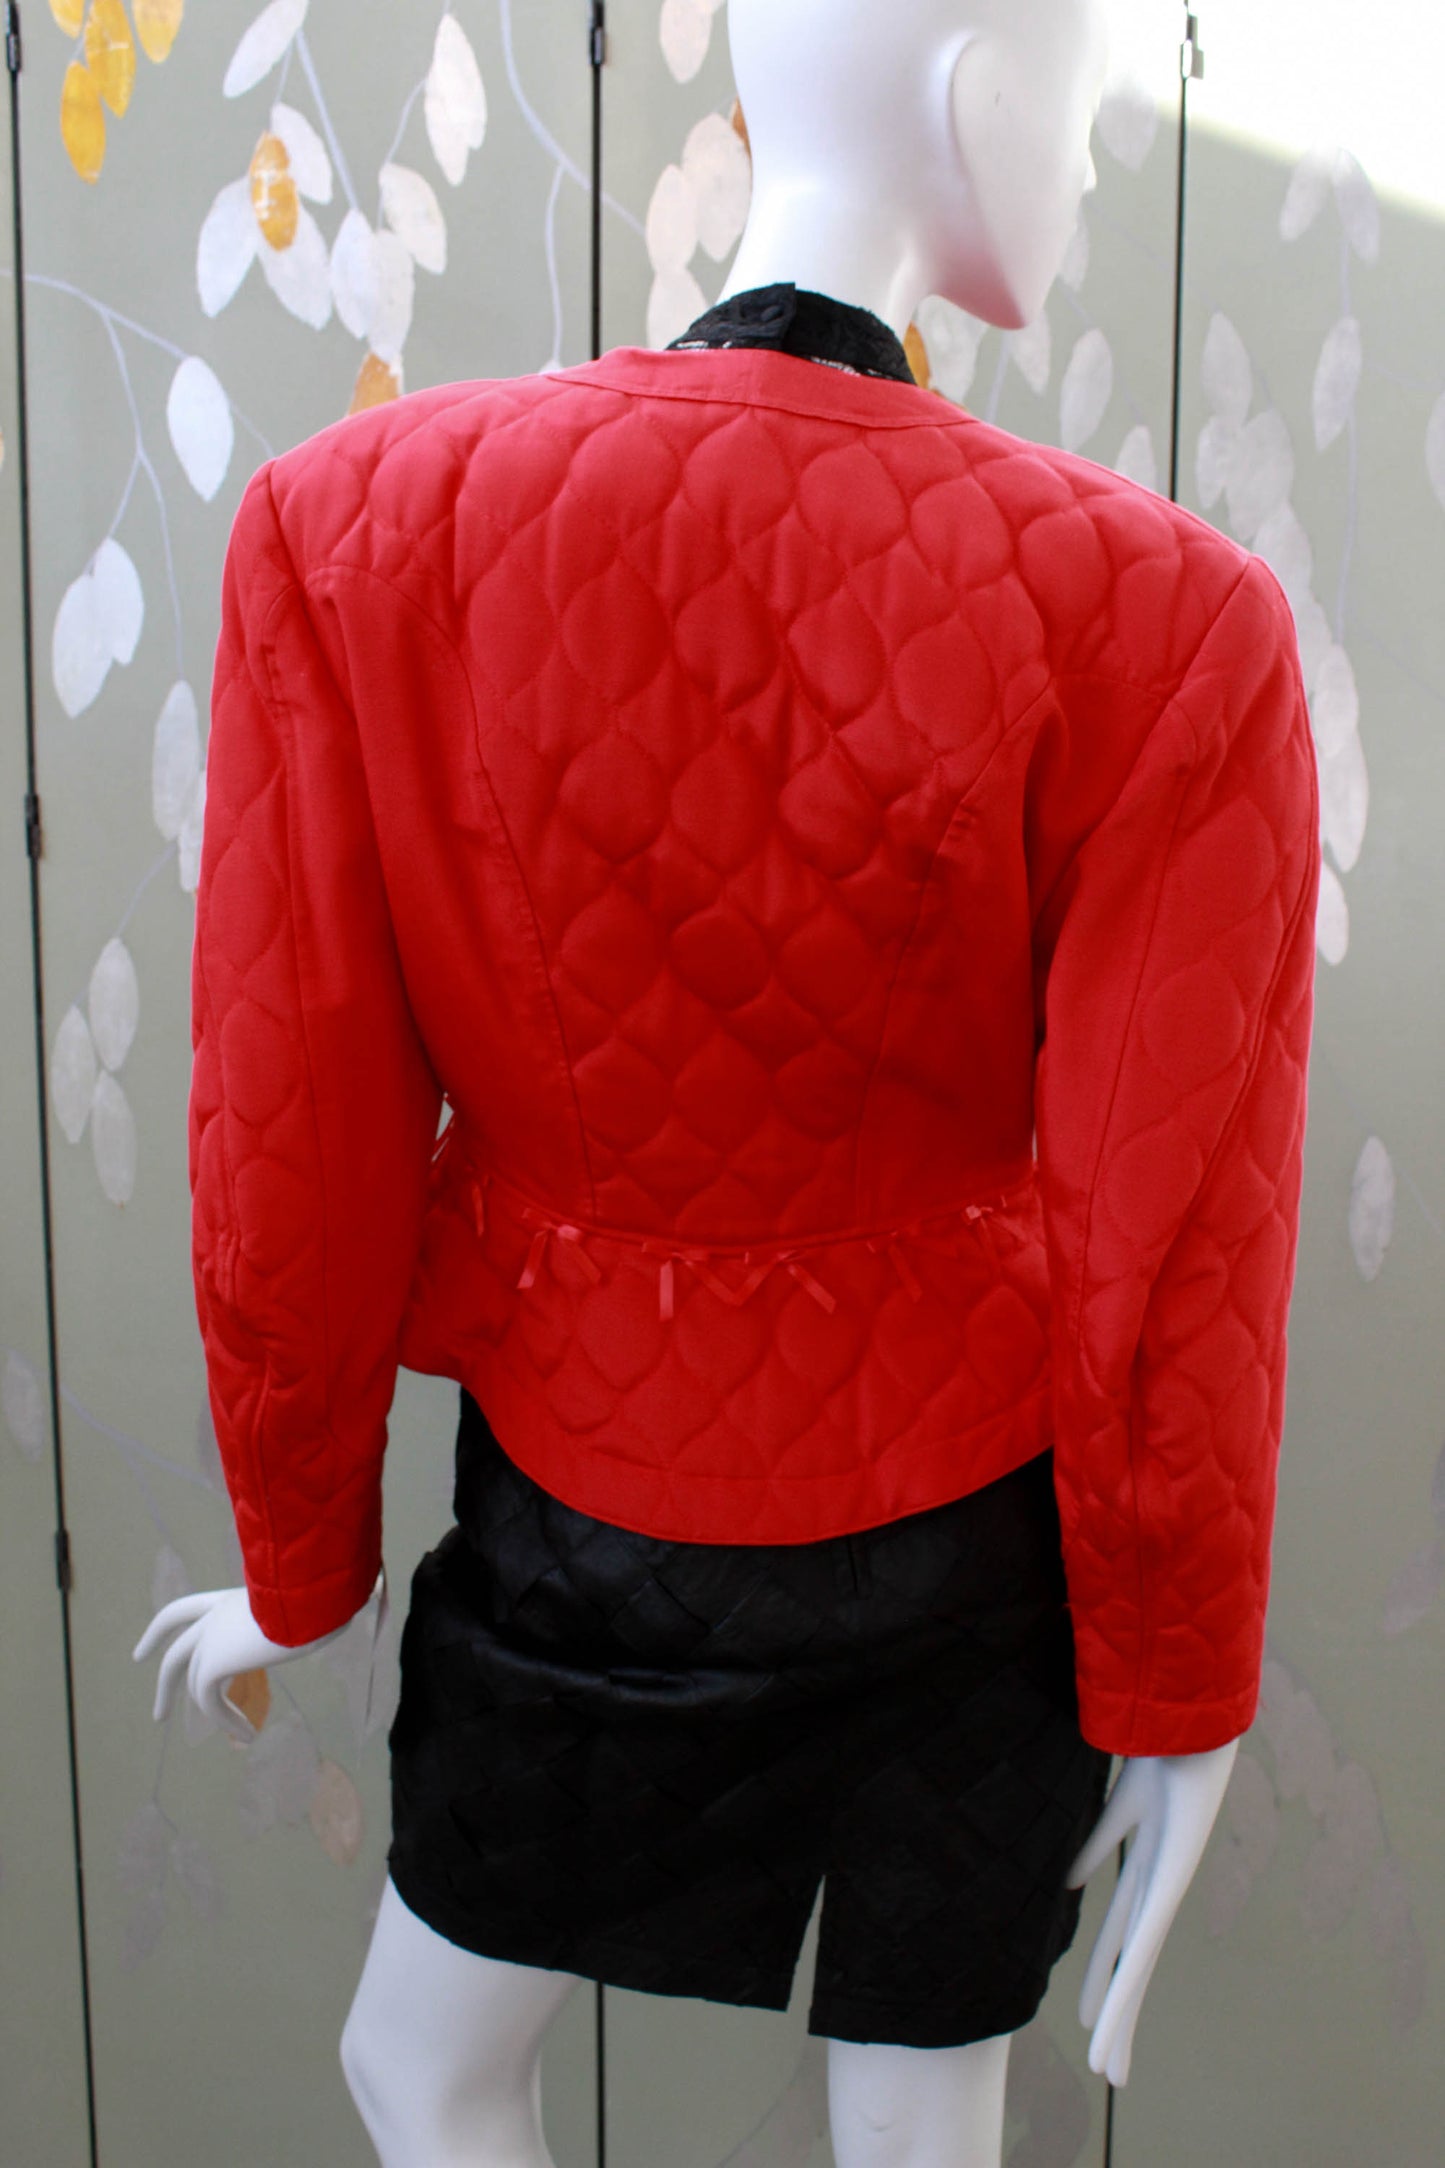 80s red quilted jacket with bows at waist coquette aesthetic roman price vintage